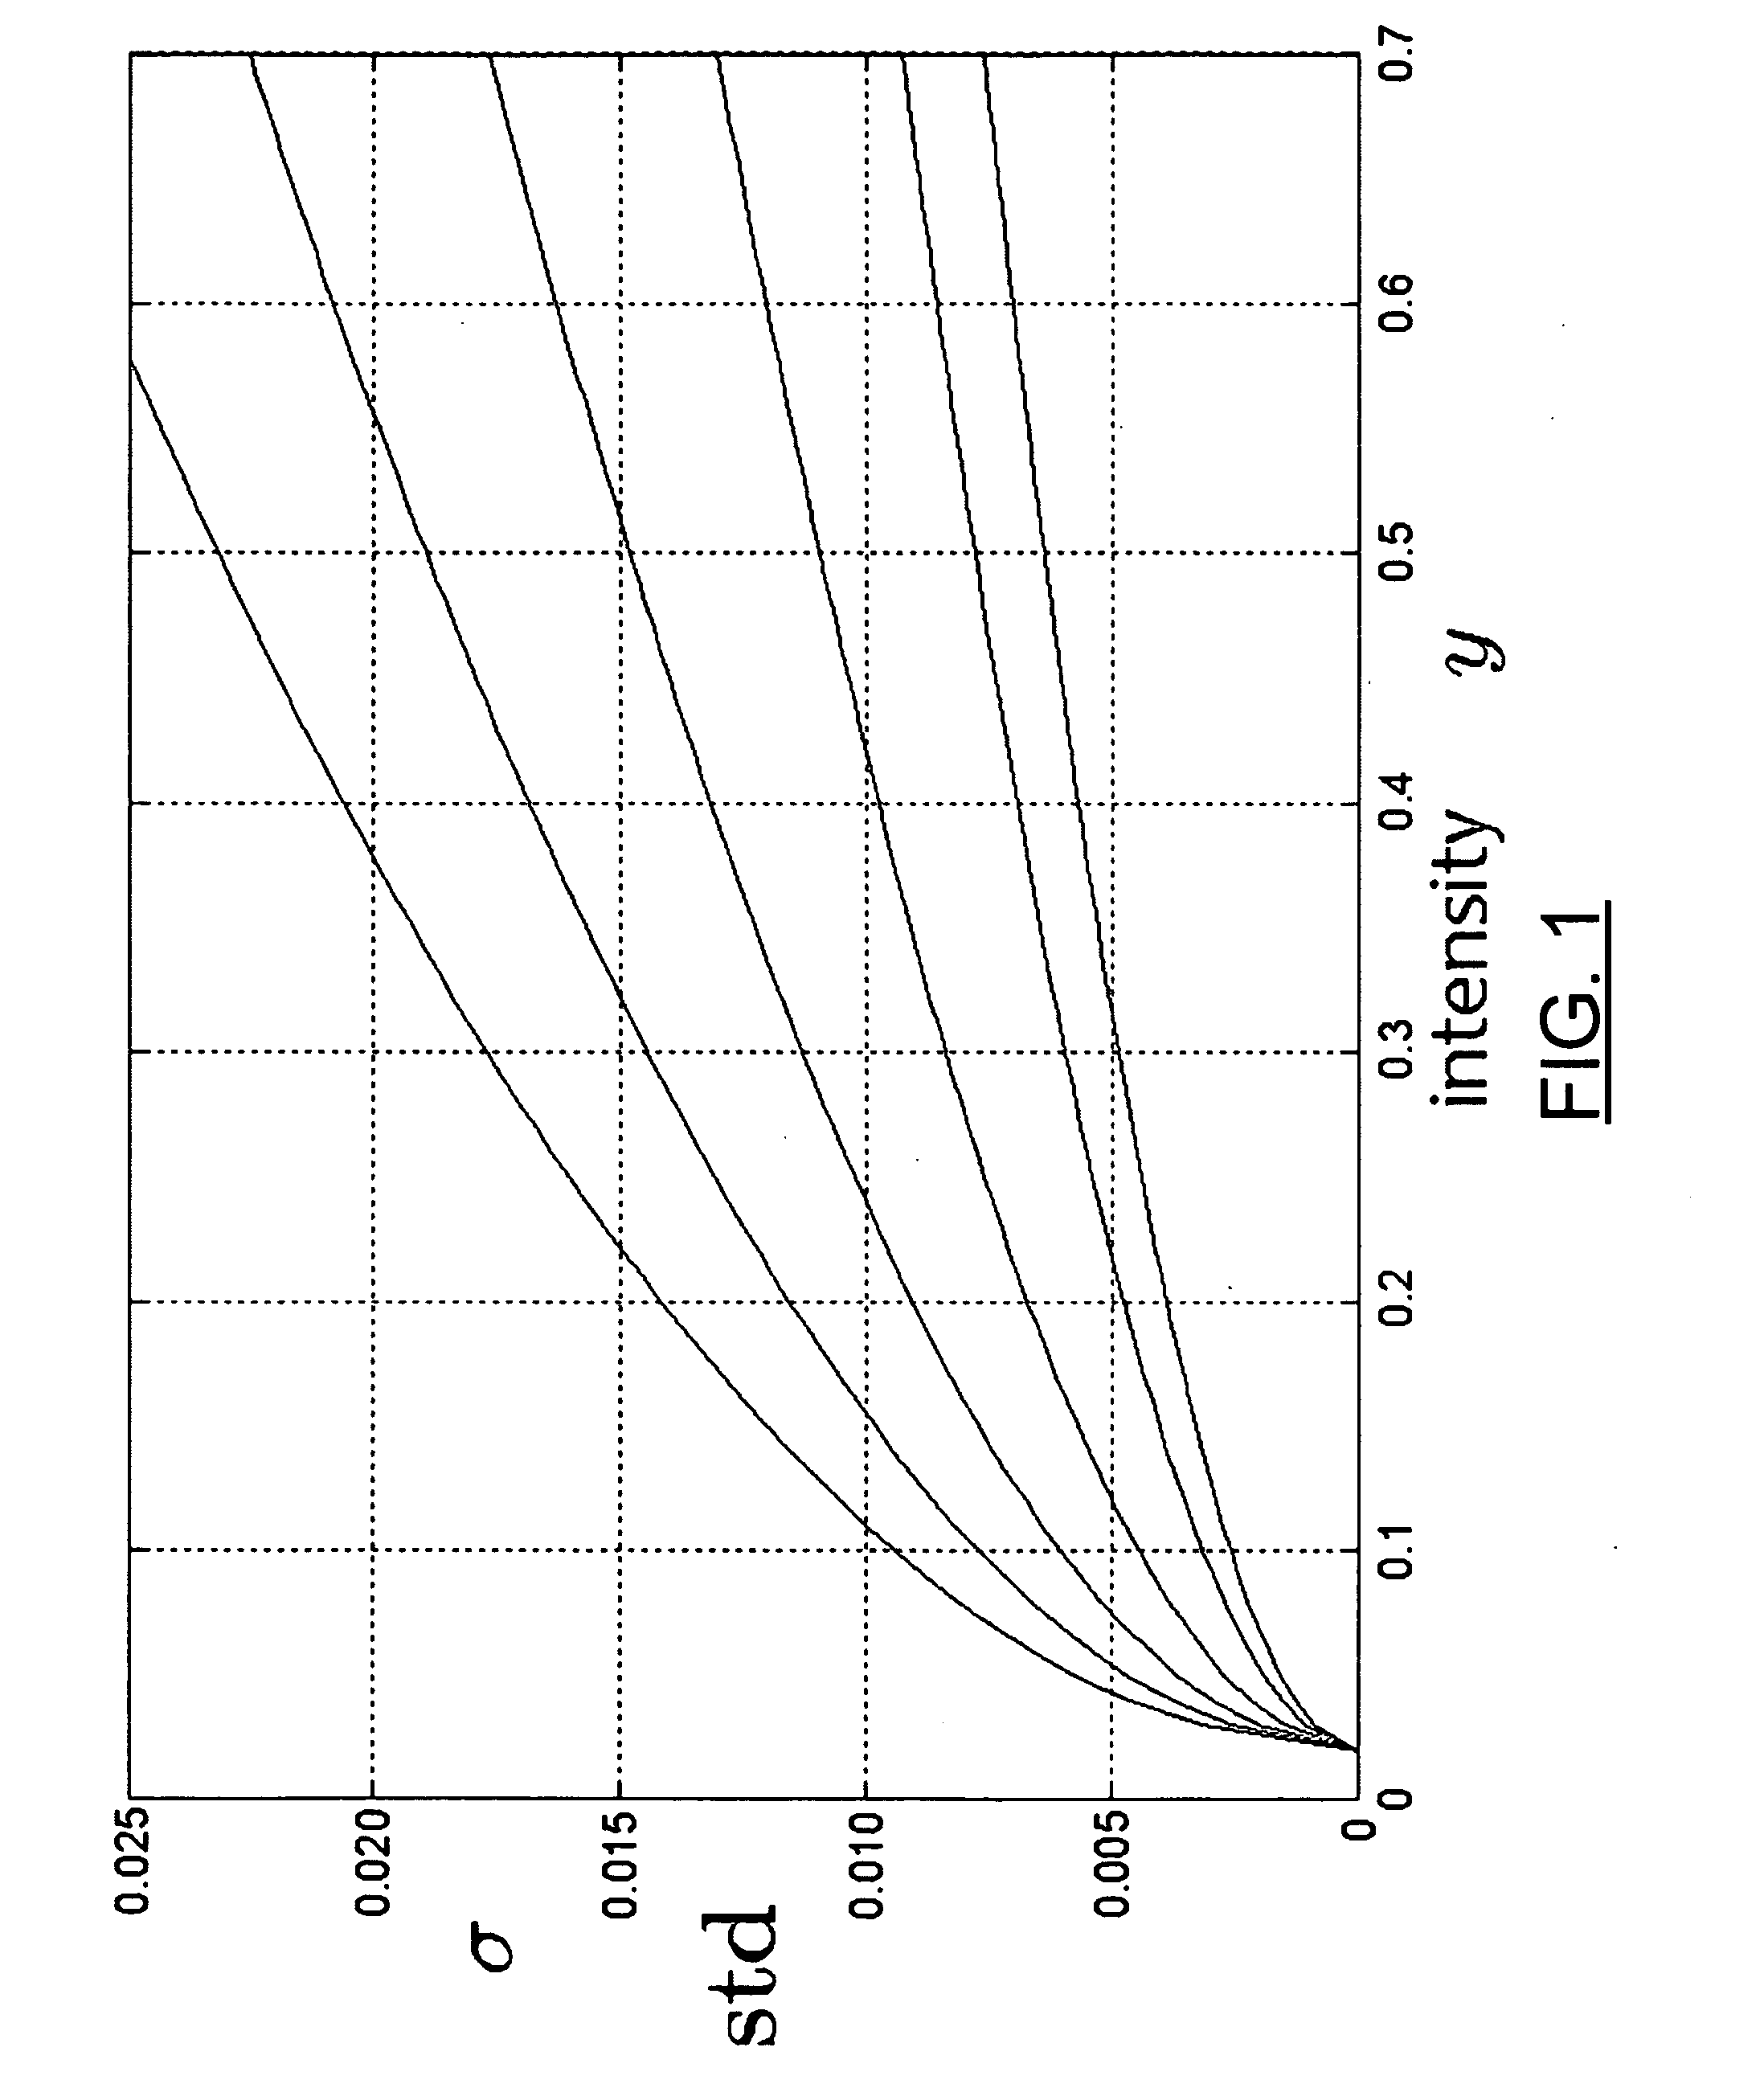 Apparatus, method, mobile station and computer program product for noise estimation, modeling and filtering of a digital image